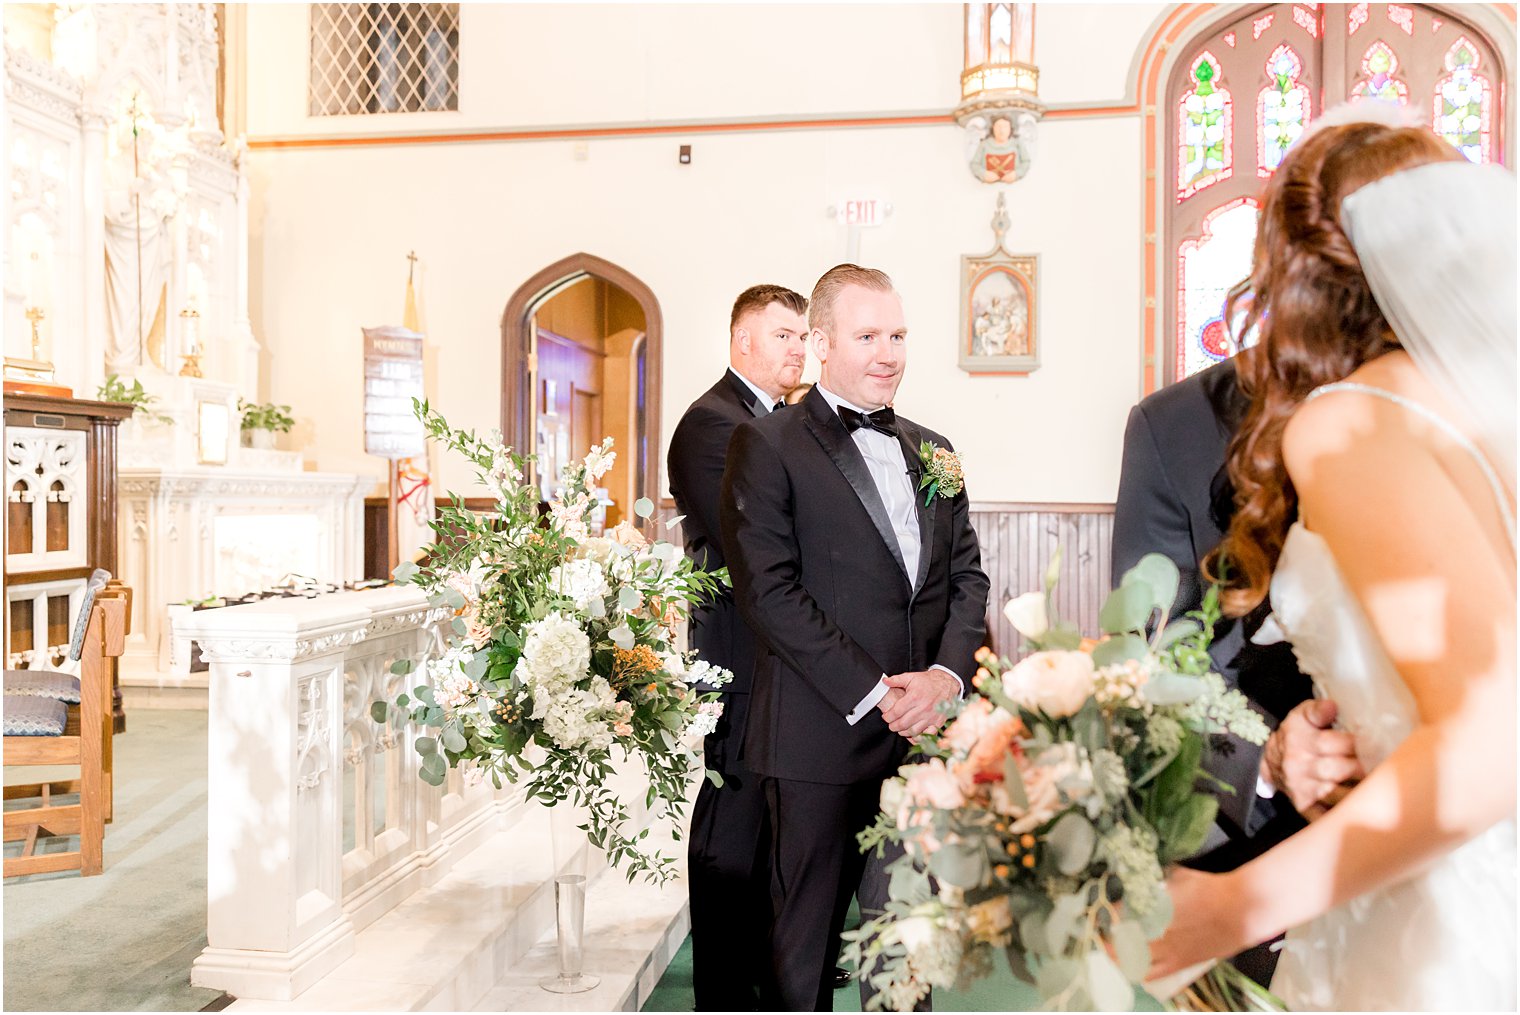 groom waits for bride at alter for traditional ceremony at St. Peter's Church in Point Pleasant